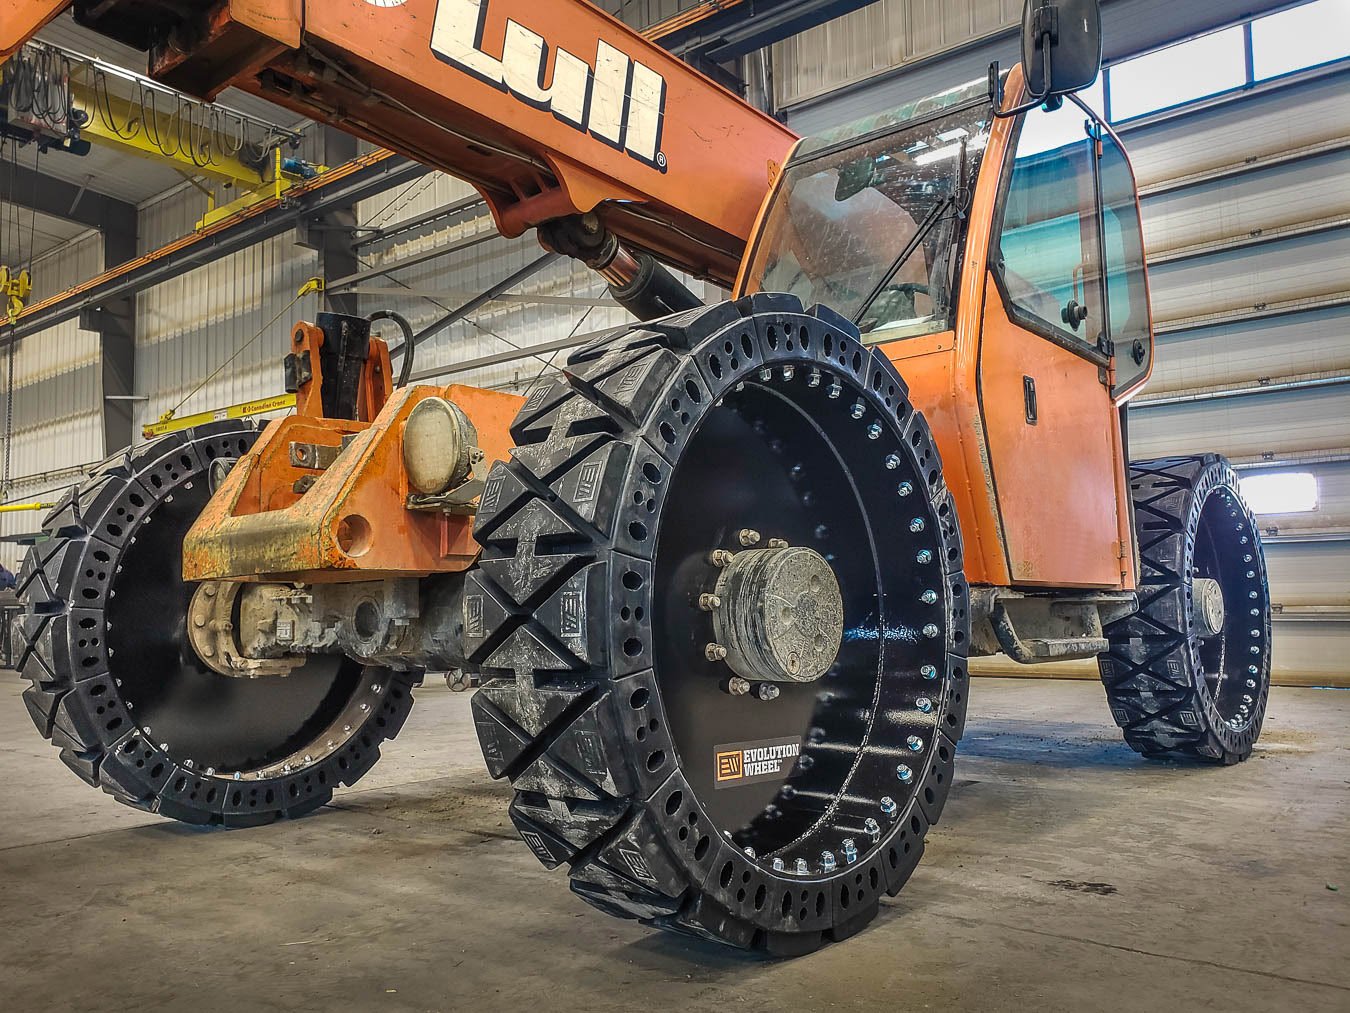 This picture shows our Gradall tires on an orange Lull telehandler